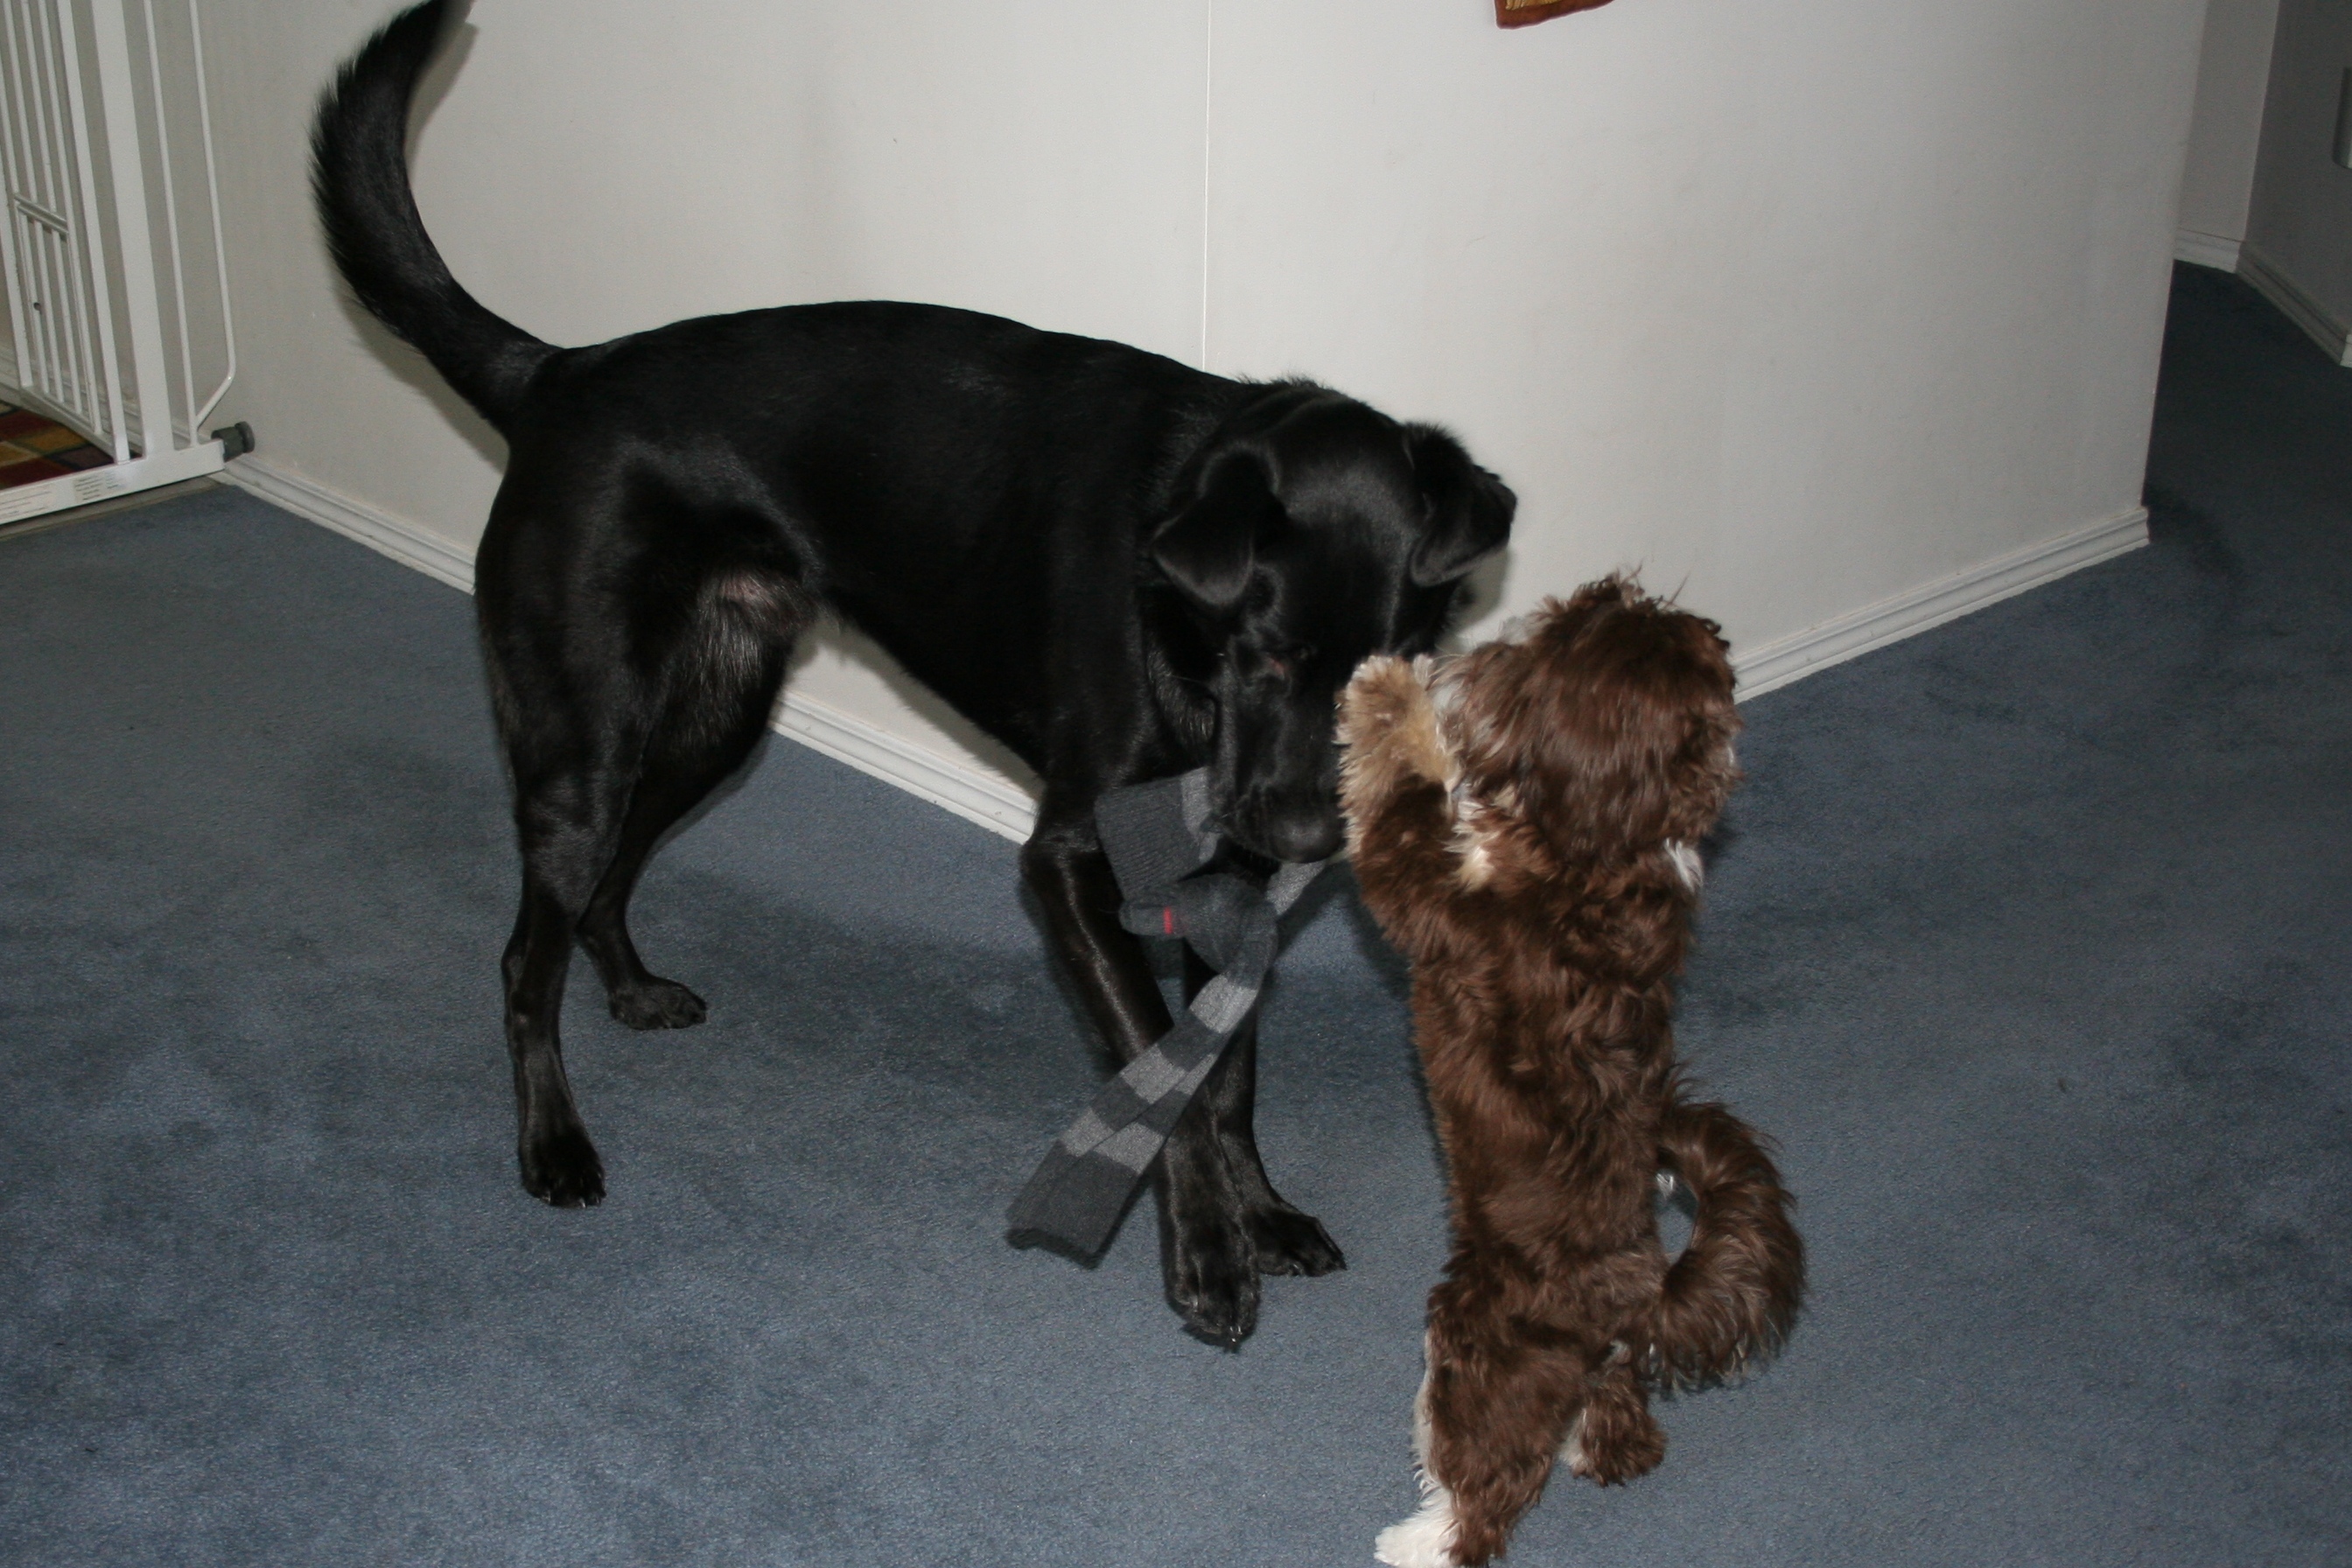 A havanese and lab-shepherd mix playing together